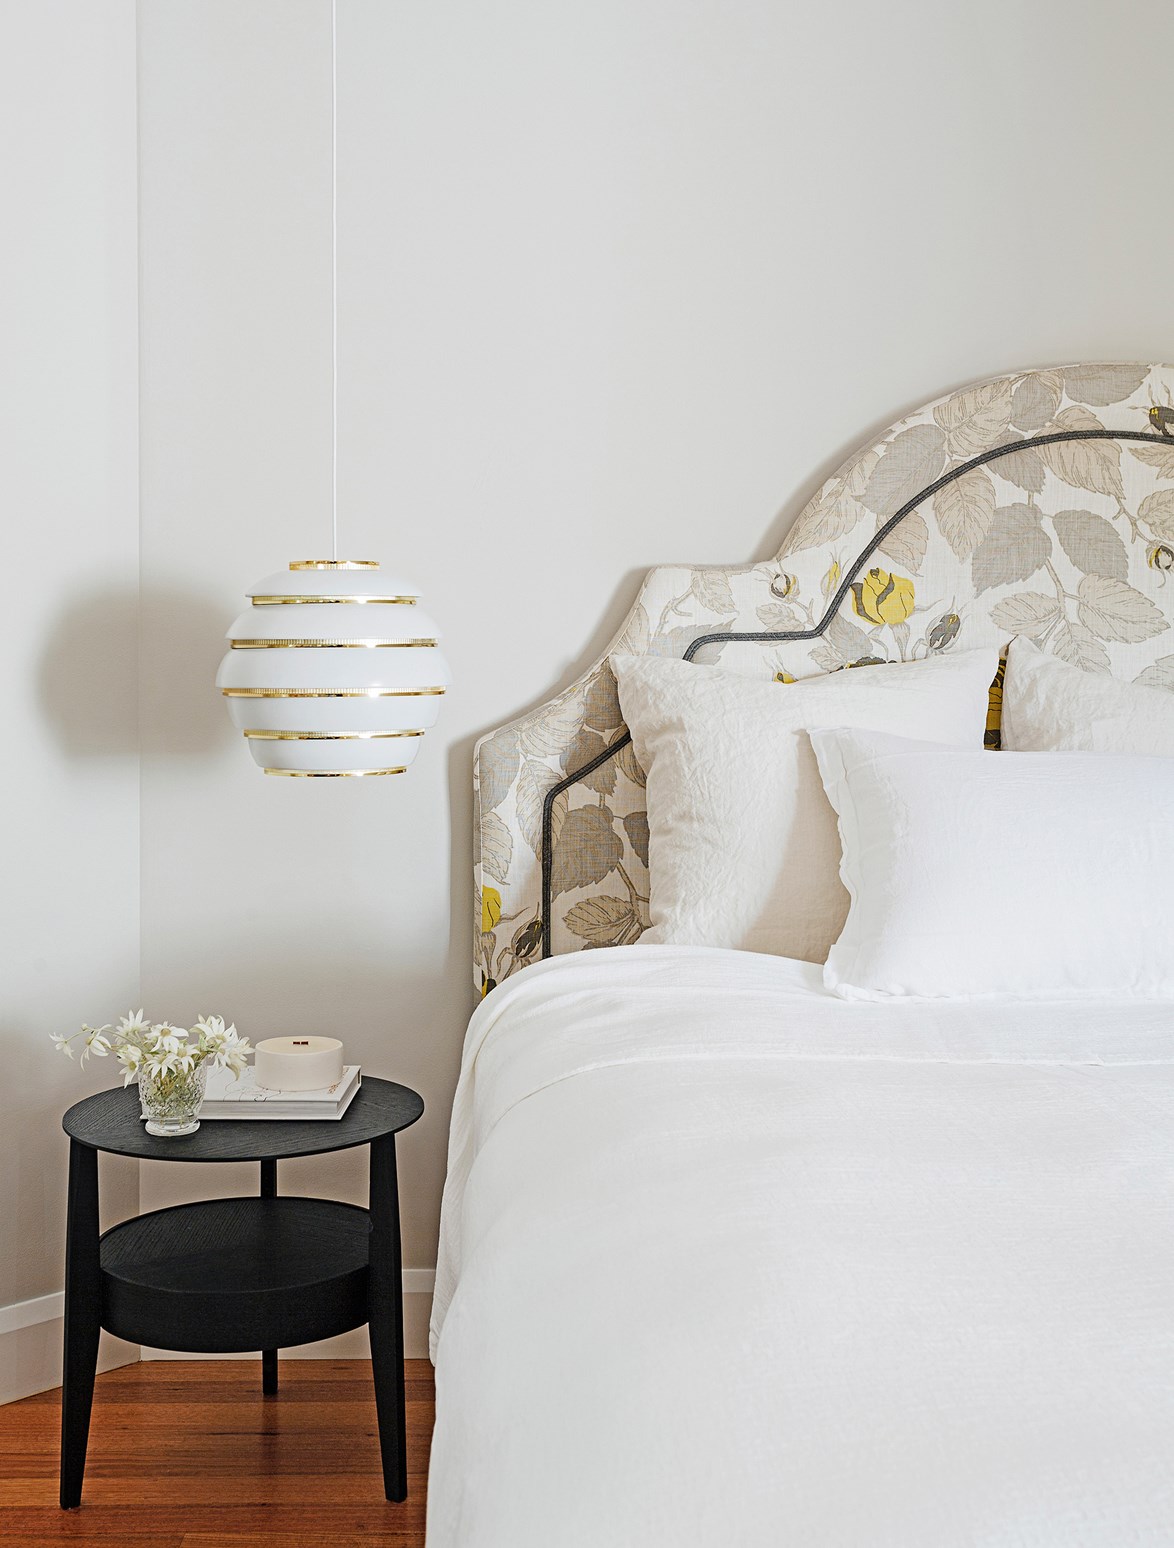 Crisp white sheets, fluffy pillows and a beautiful upholstered bedhead create a soft and dreamy place to rest in the bedroom of this [feminine Sydney home](https://www.homestolove.com.au/gallery-master-stroke-feminine-sydney-house-design-1-2021|target="_blank"). The brass pendant adds a welcomed touch of bling. Photo: Felix Forest / *real living*